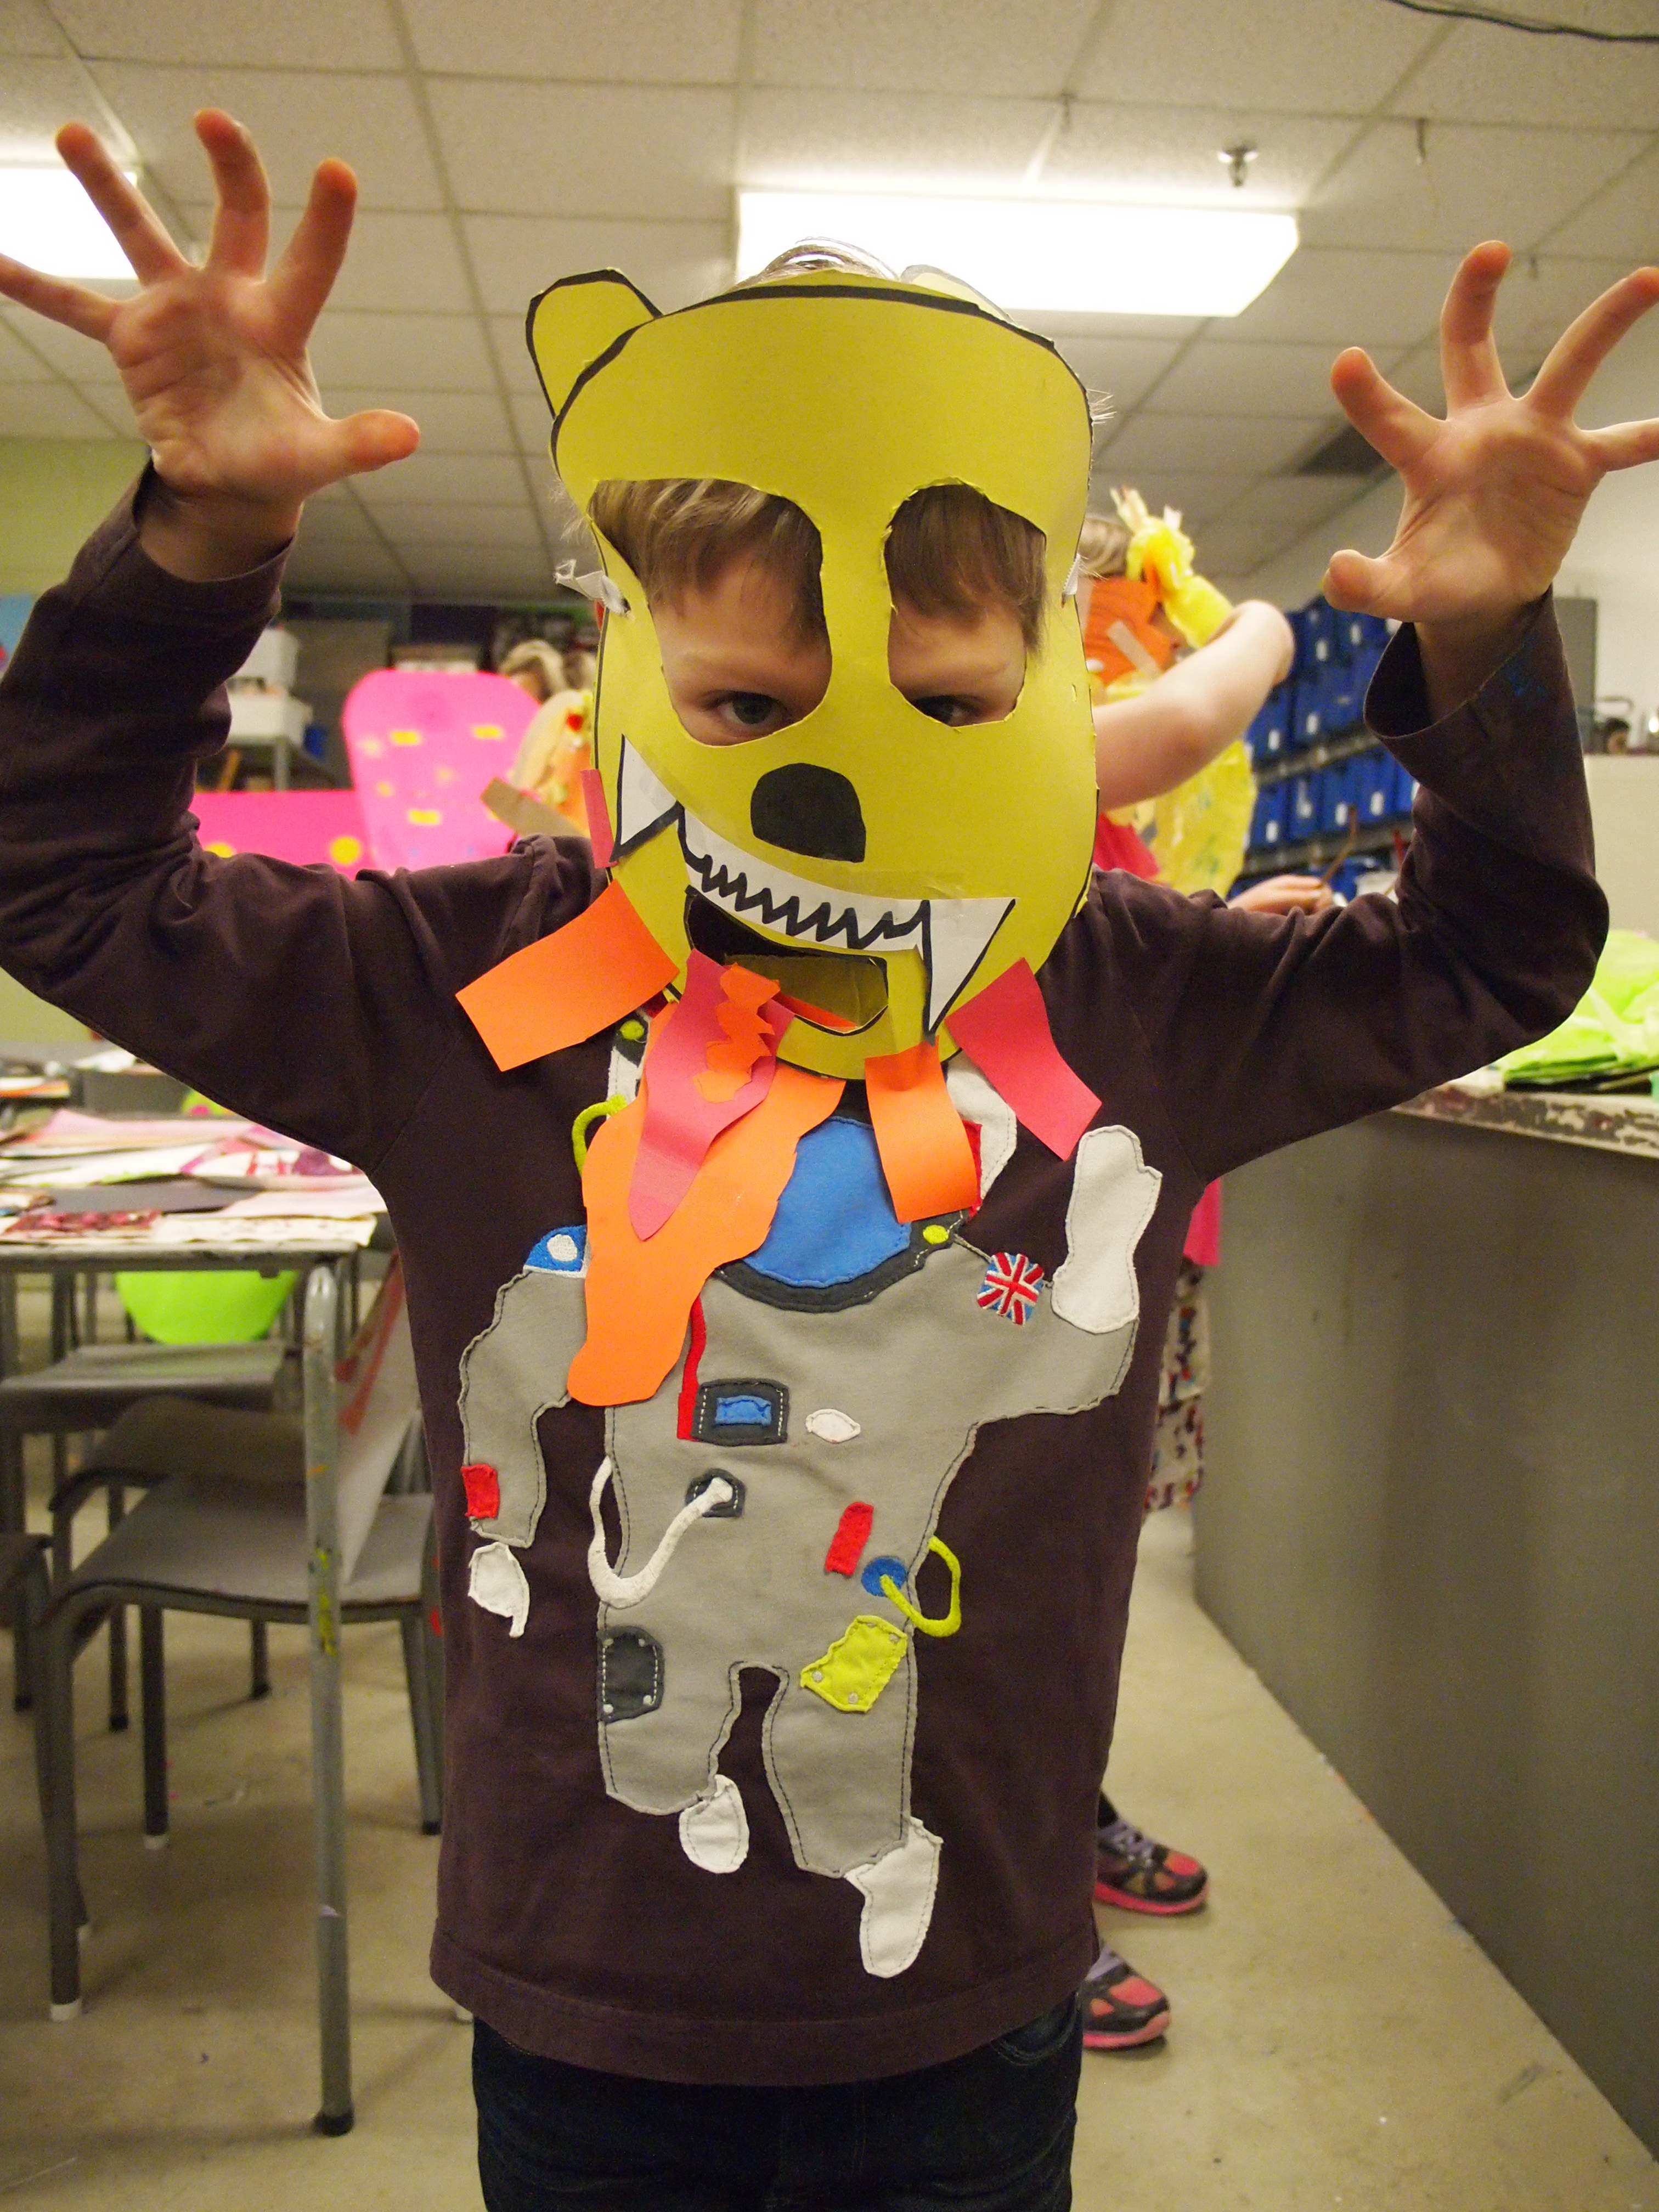 A young boy in an astronaut sweatshirt posing in an elaborate lion mask made of construction paper